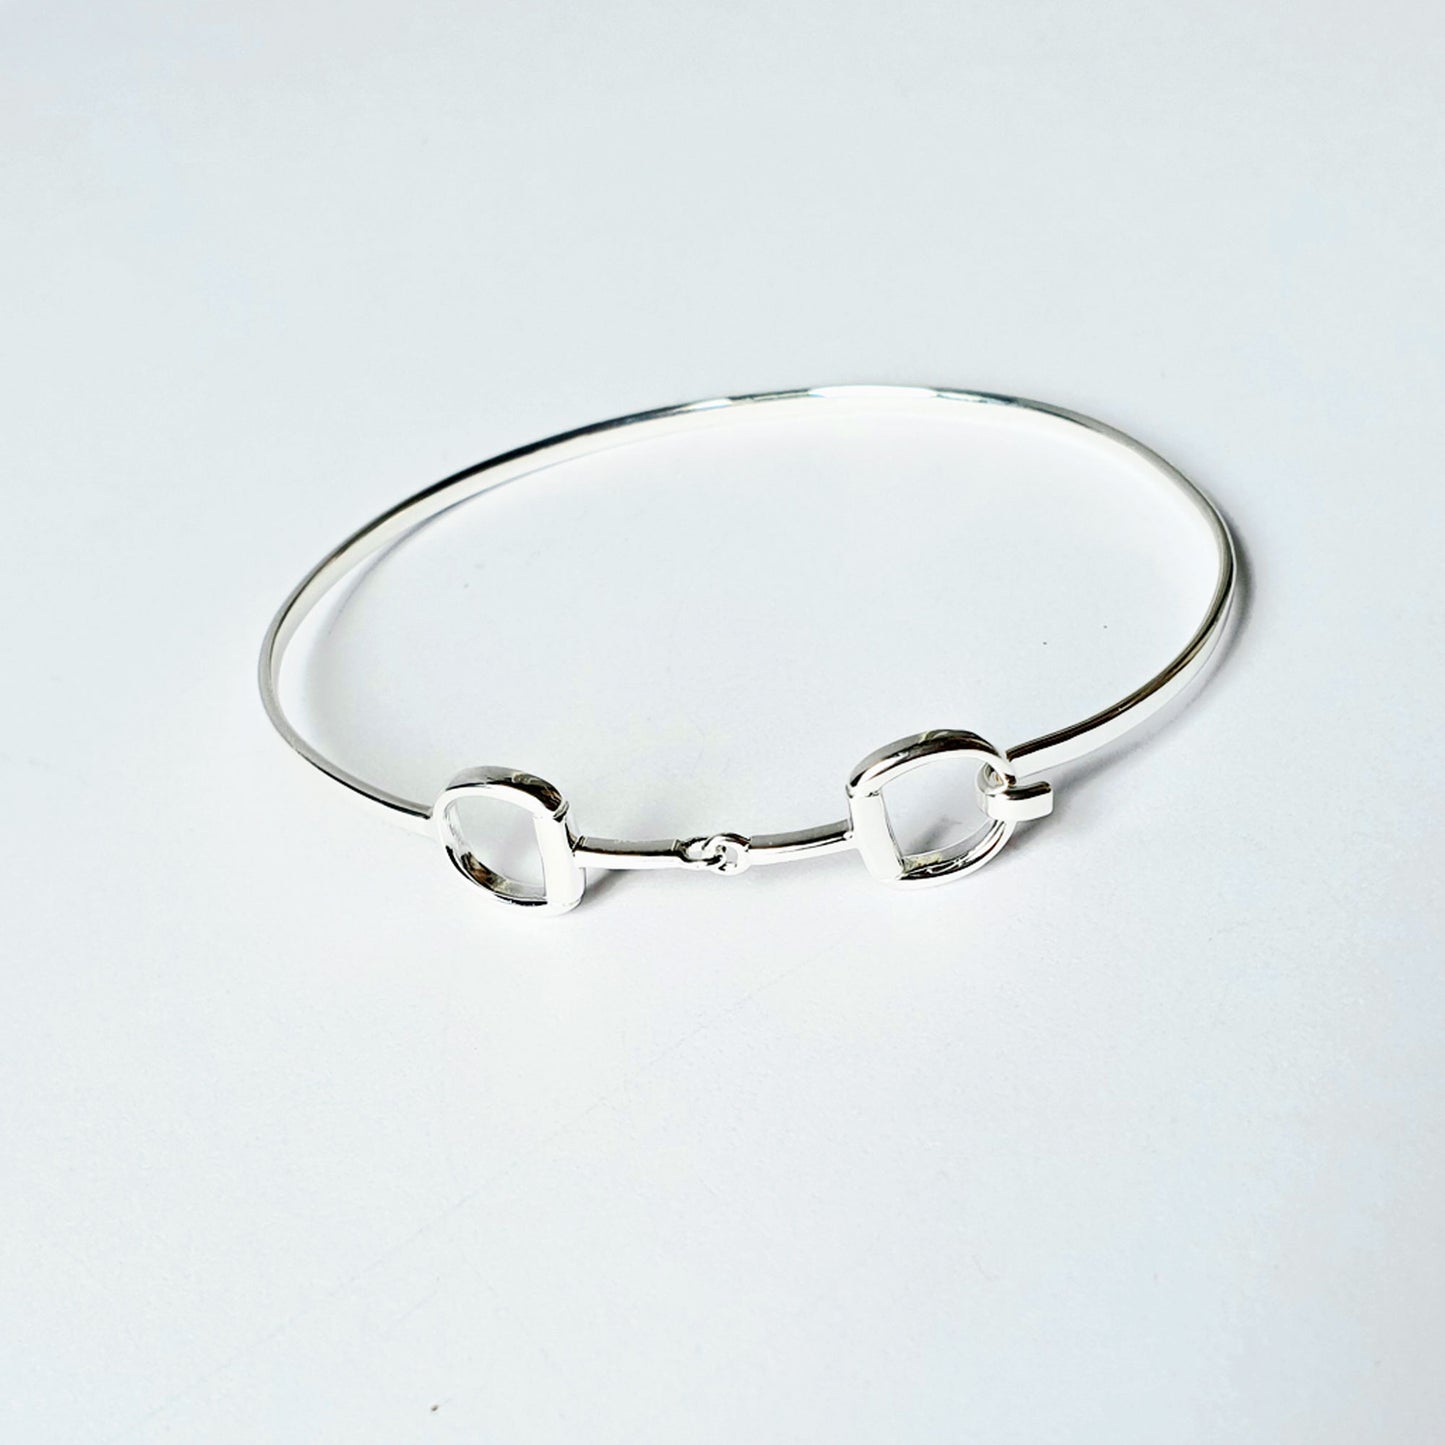 Sterling silver cuff with snaffle bit detail